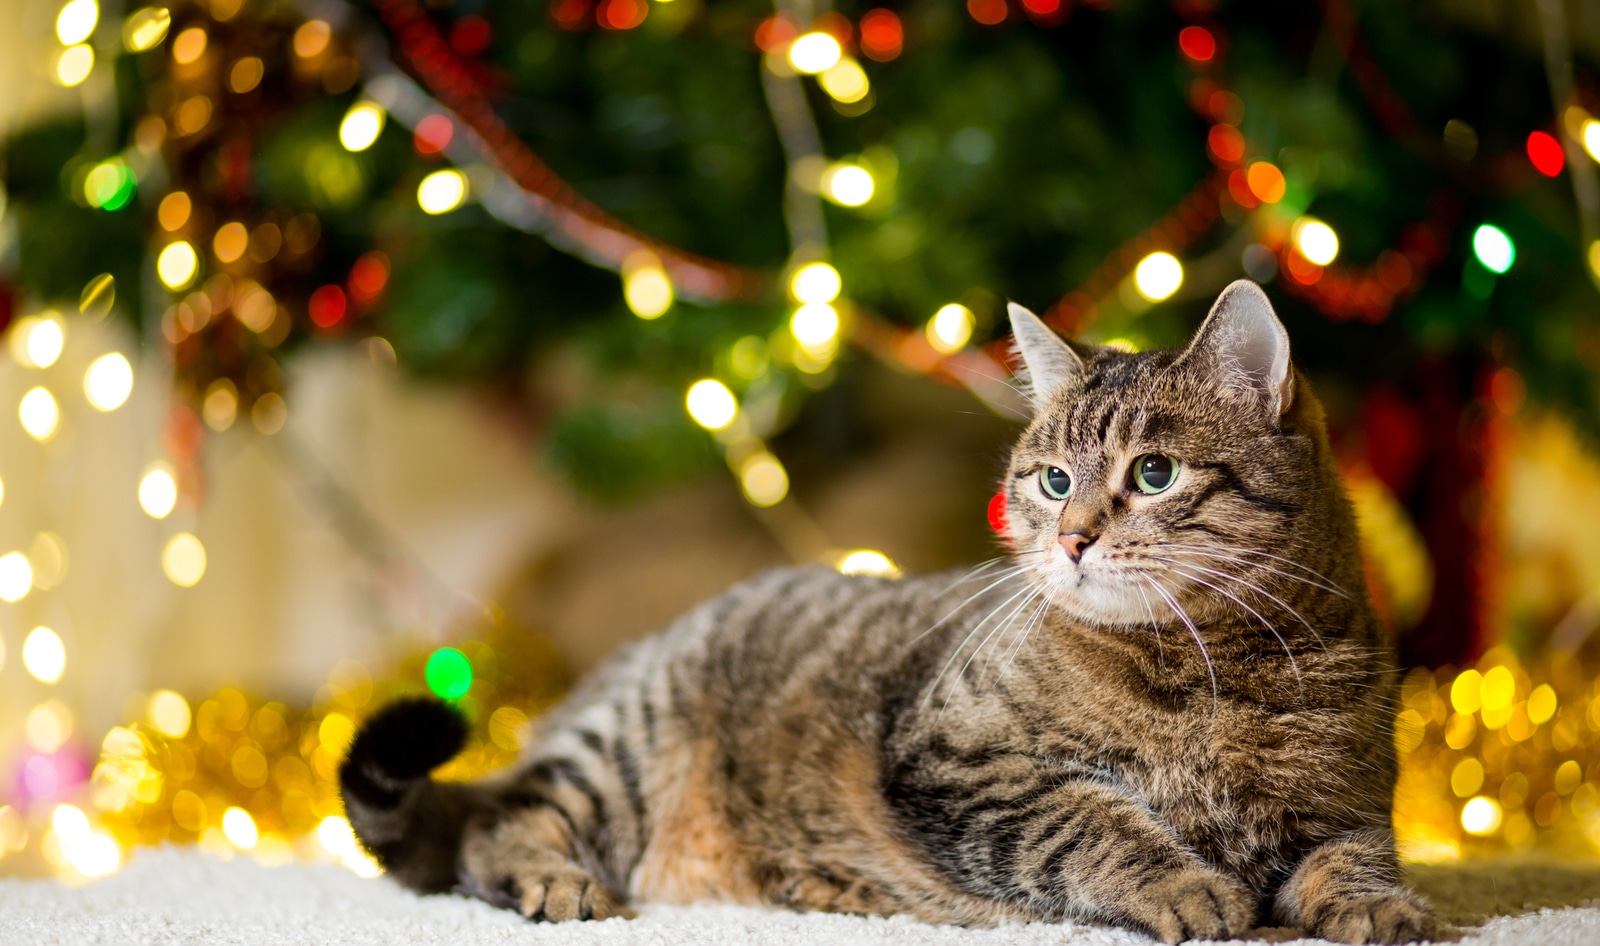 4 Easy Ways to Support Animals During the Holidays